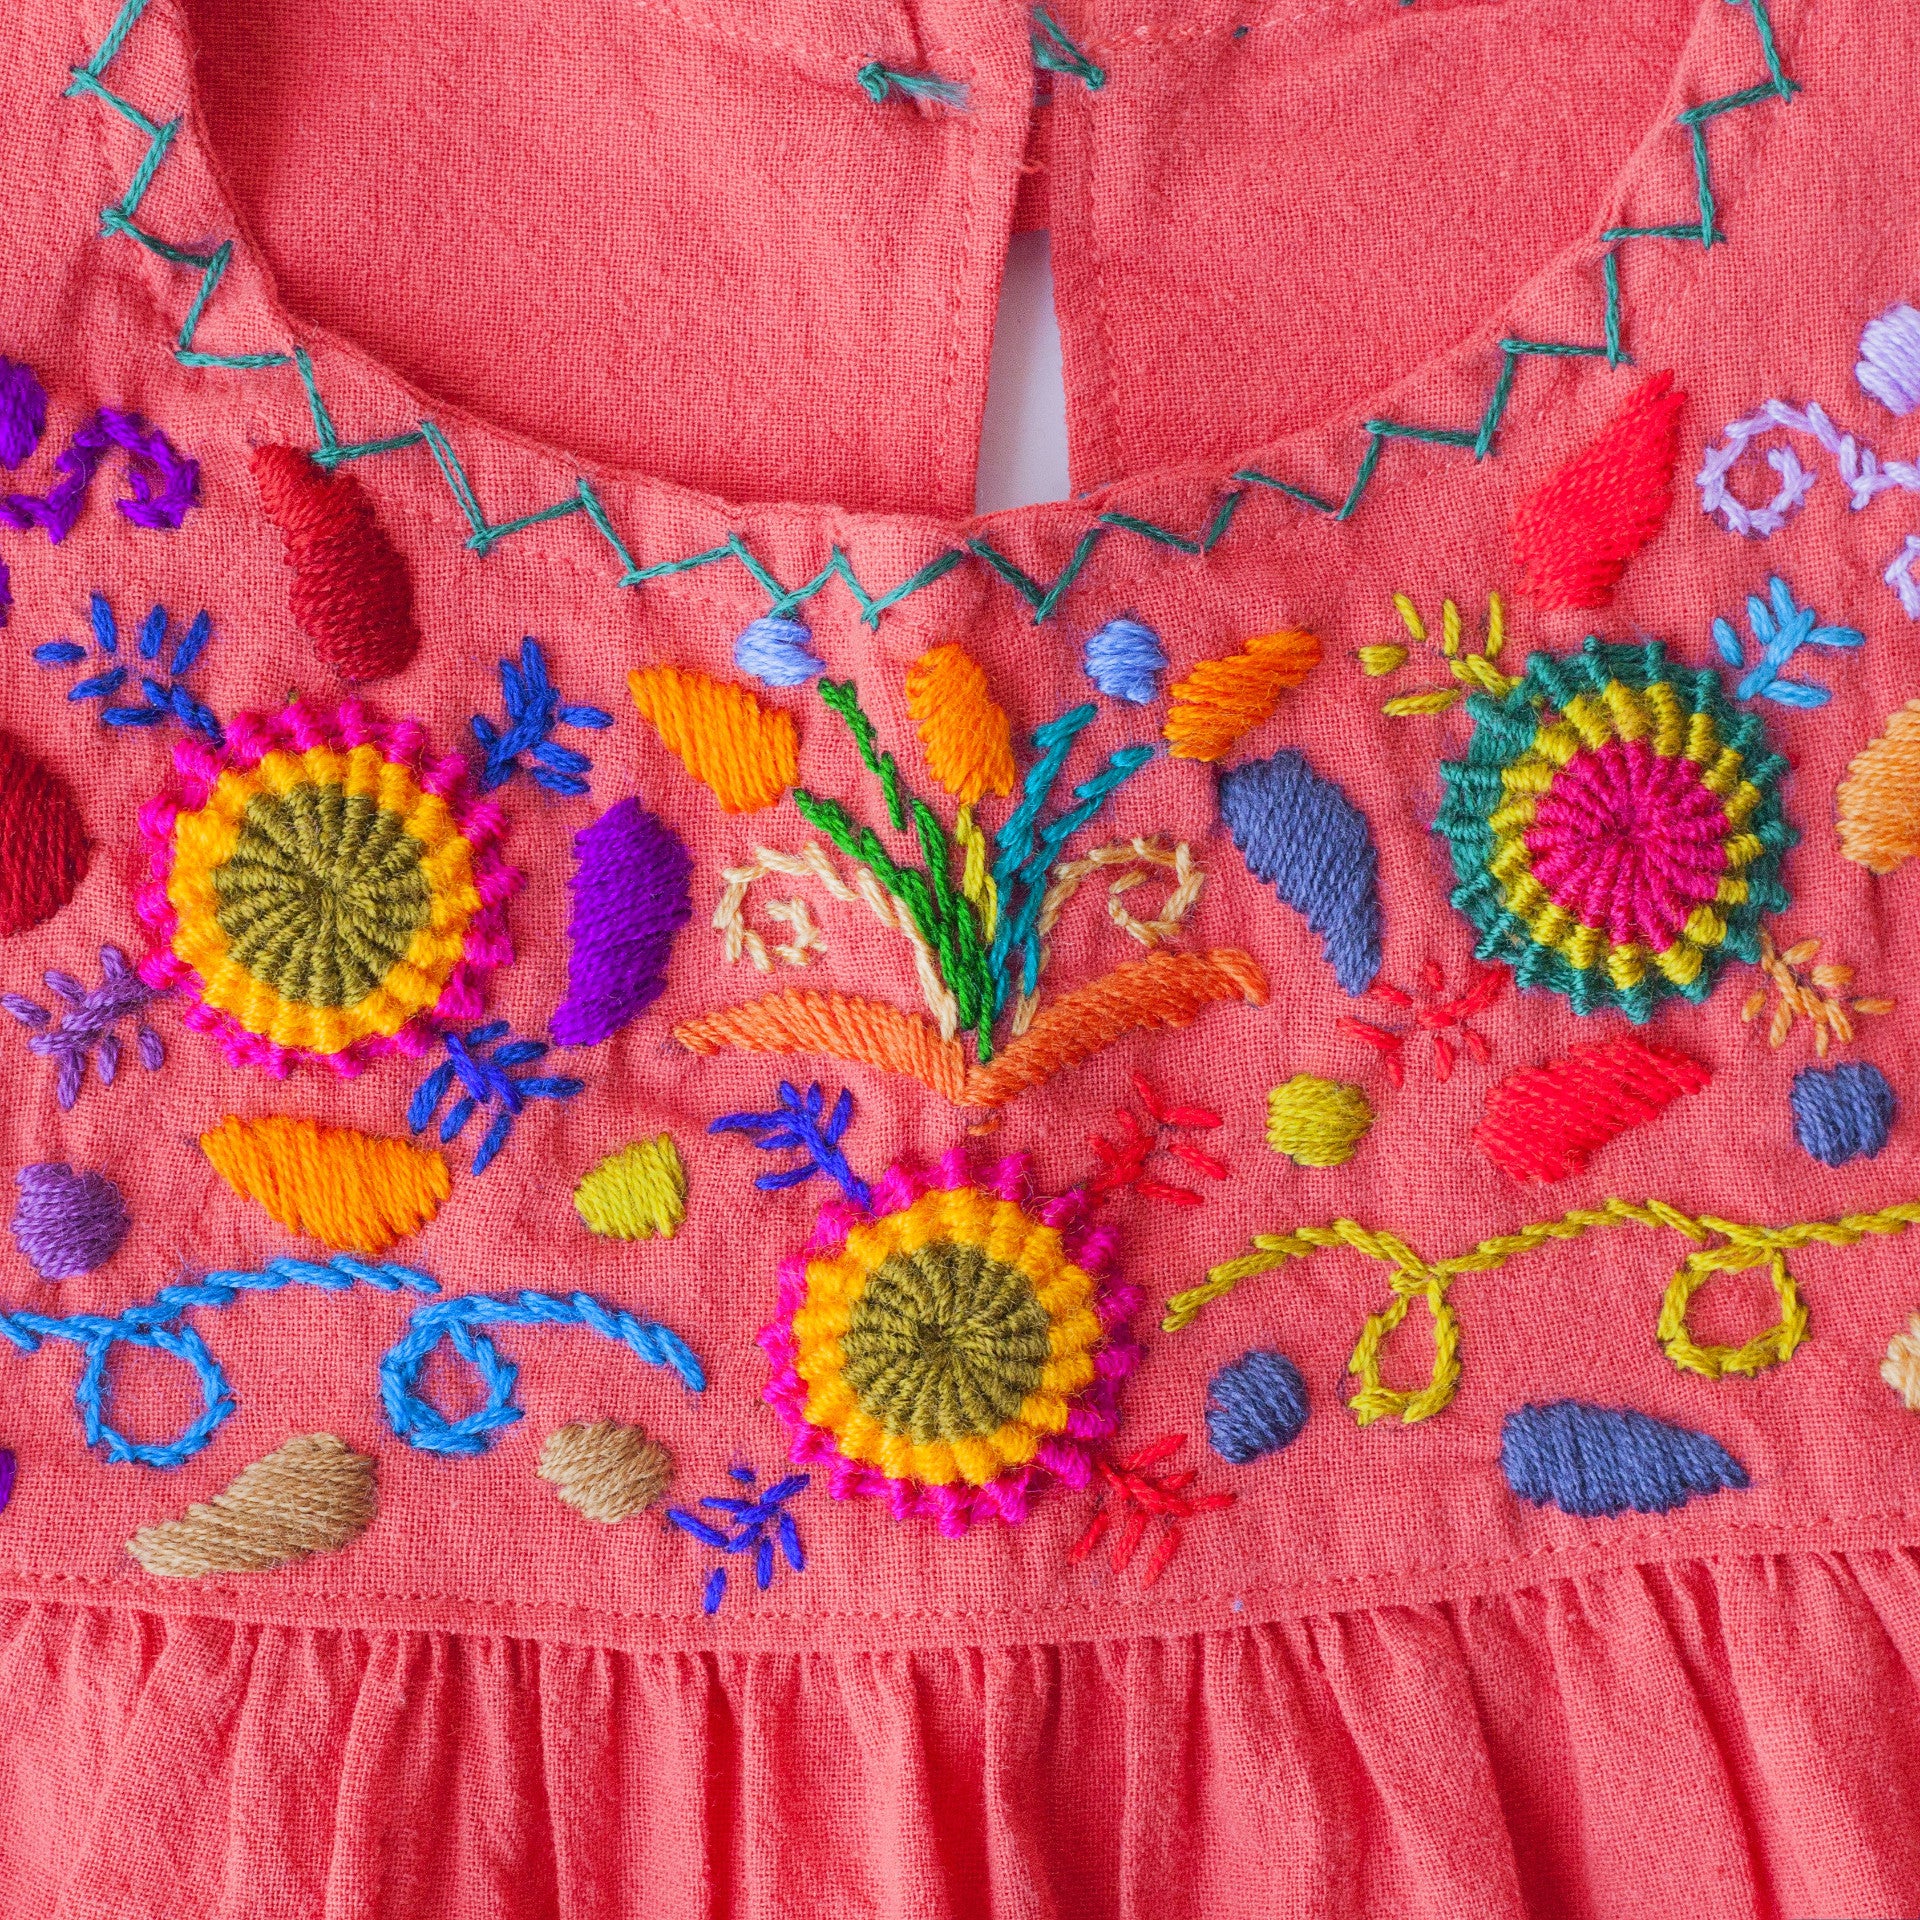 Detail of hand-embroidered multicolor floral pattern on chest and hand-done cross-stitch along neckline. 